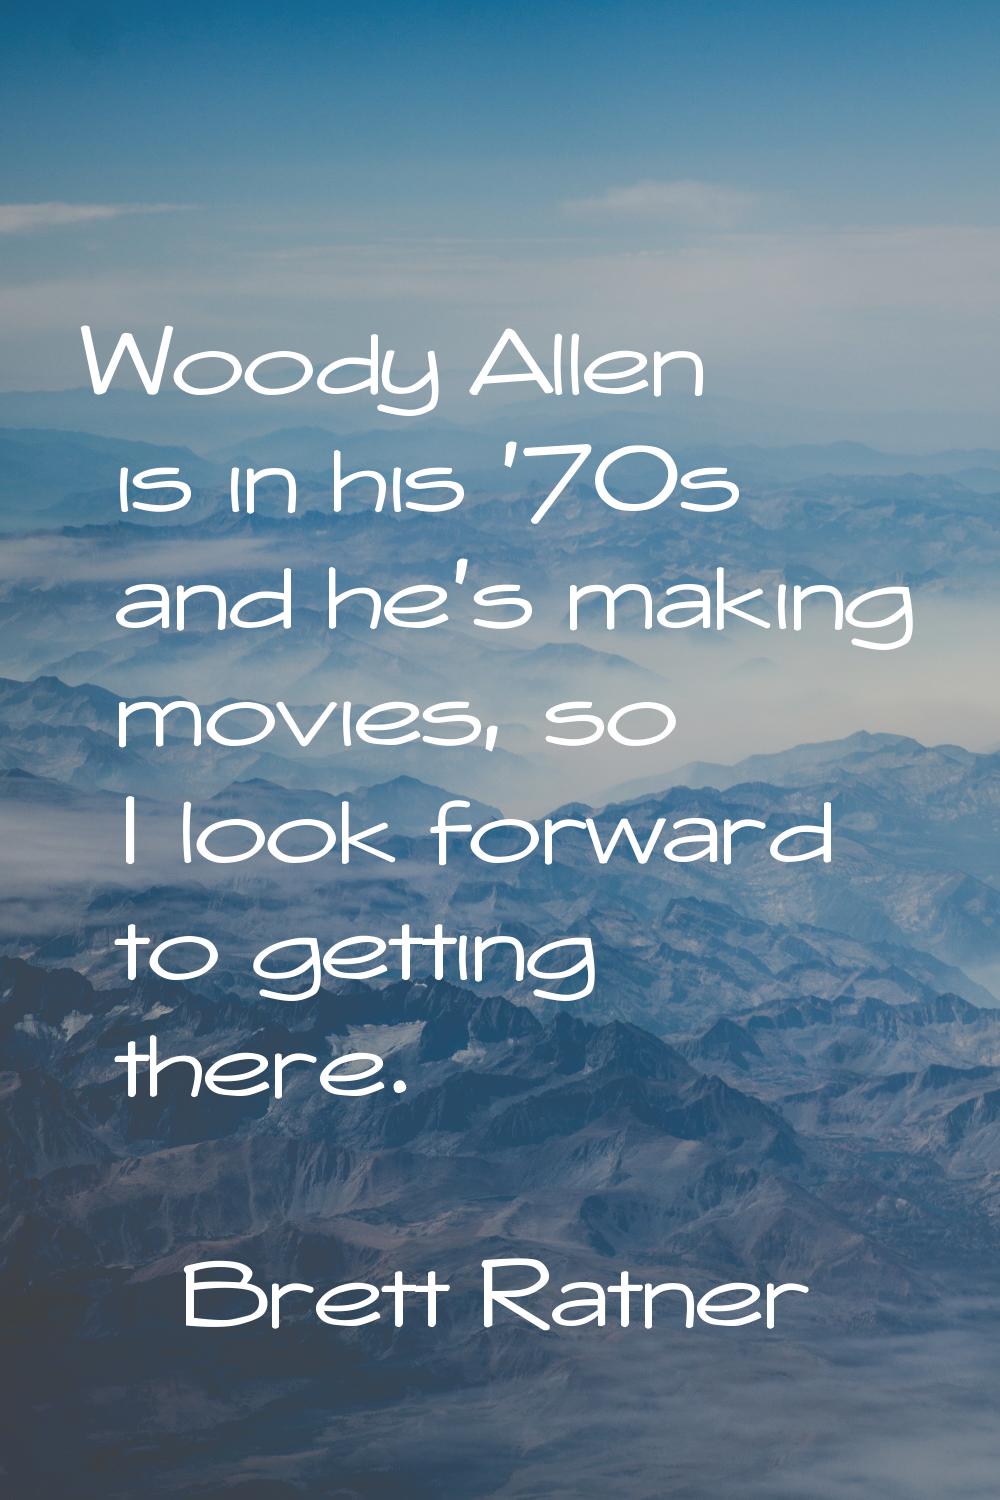 Woody Allen is in his '70s and he's making movies, so I look forward to getting there.